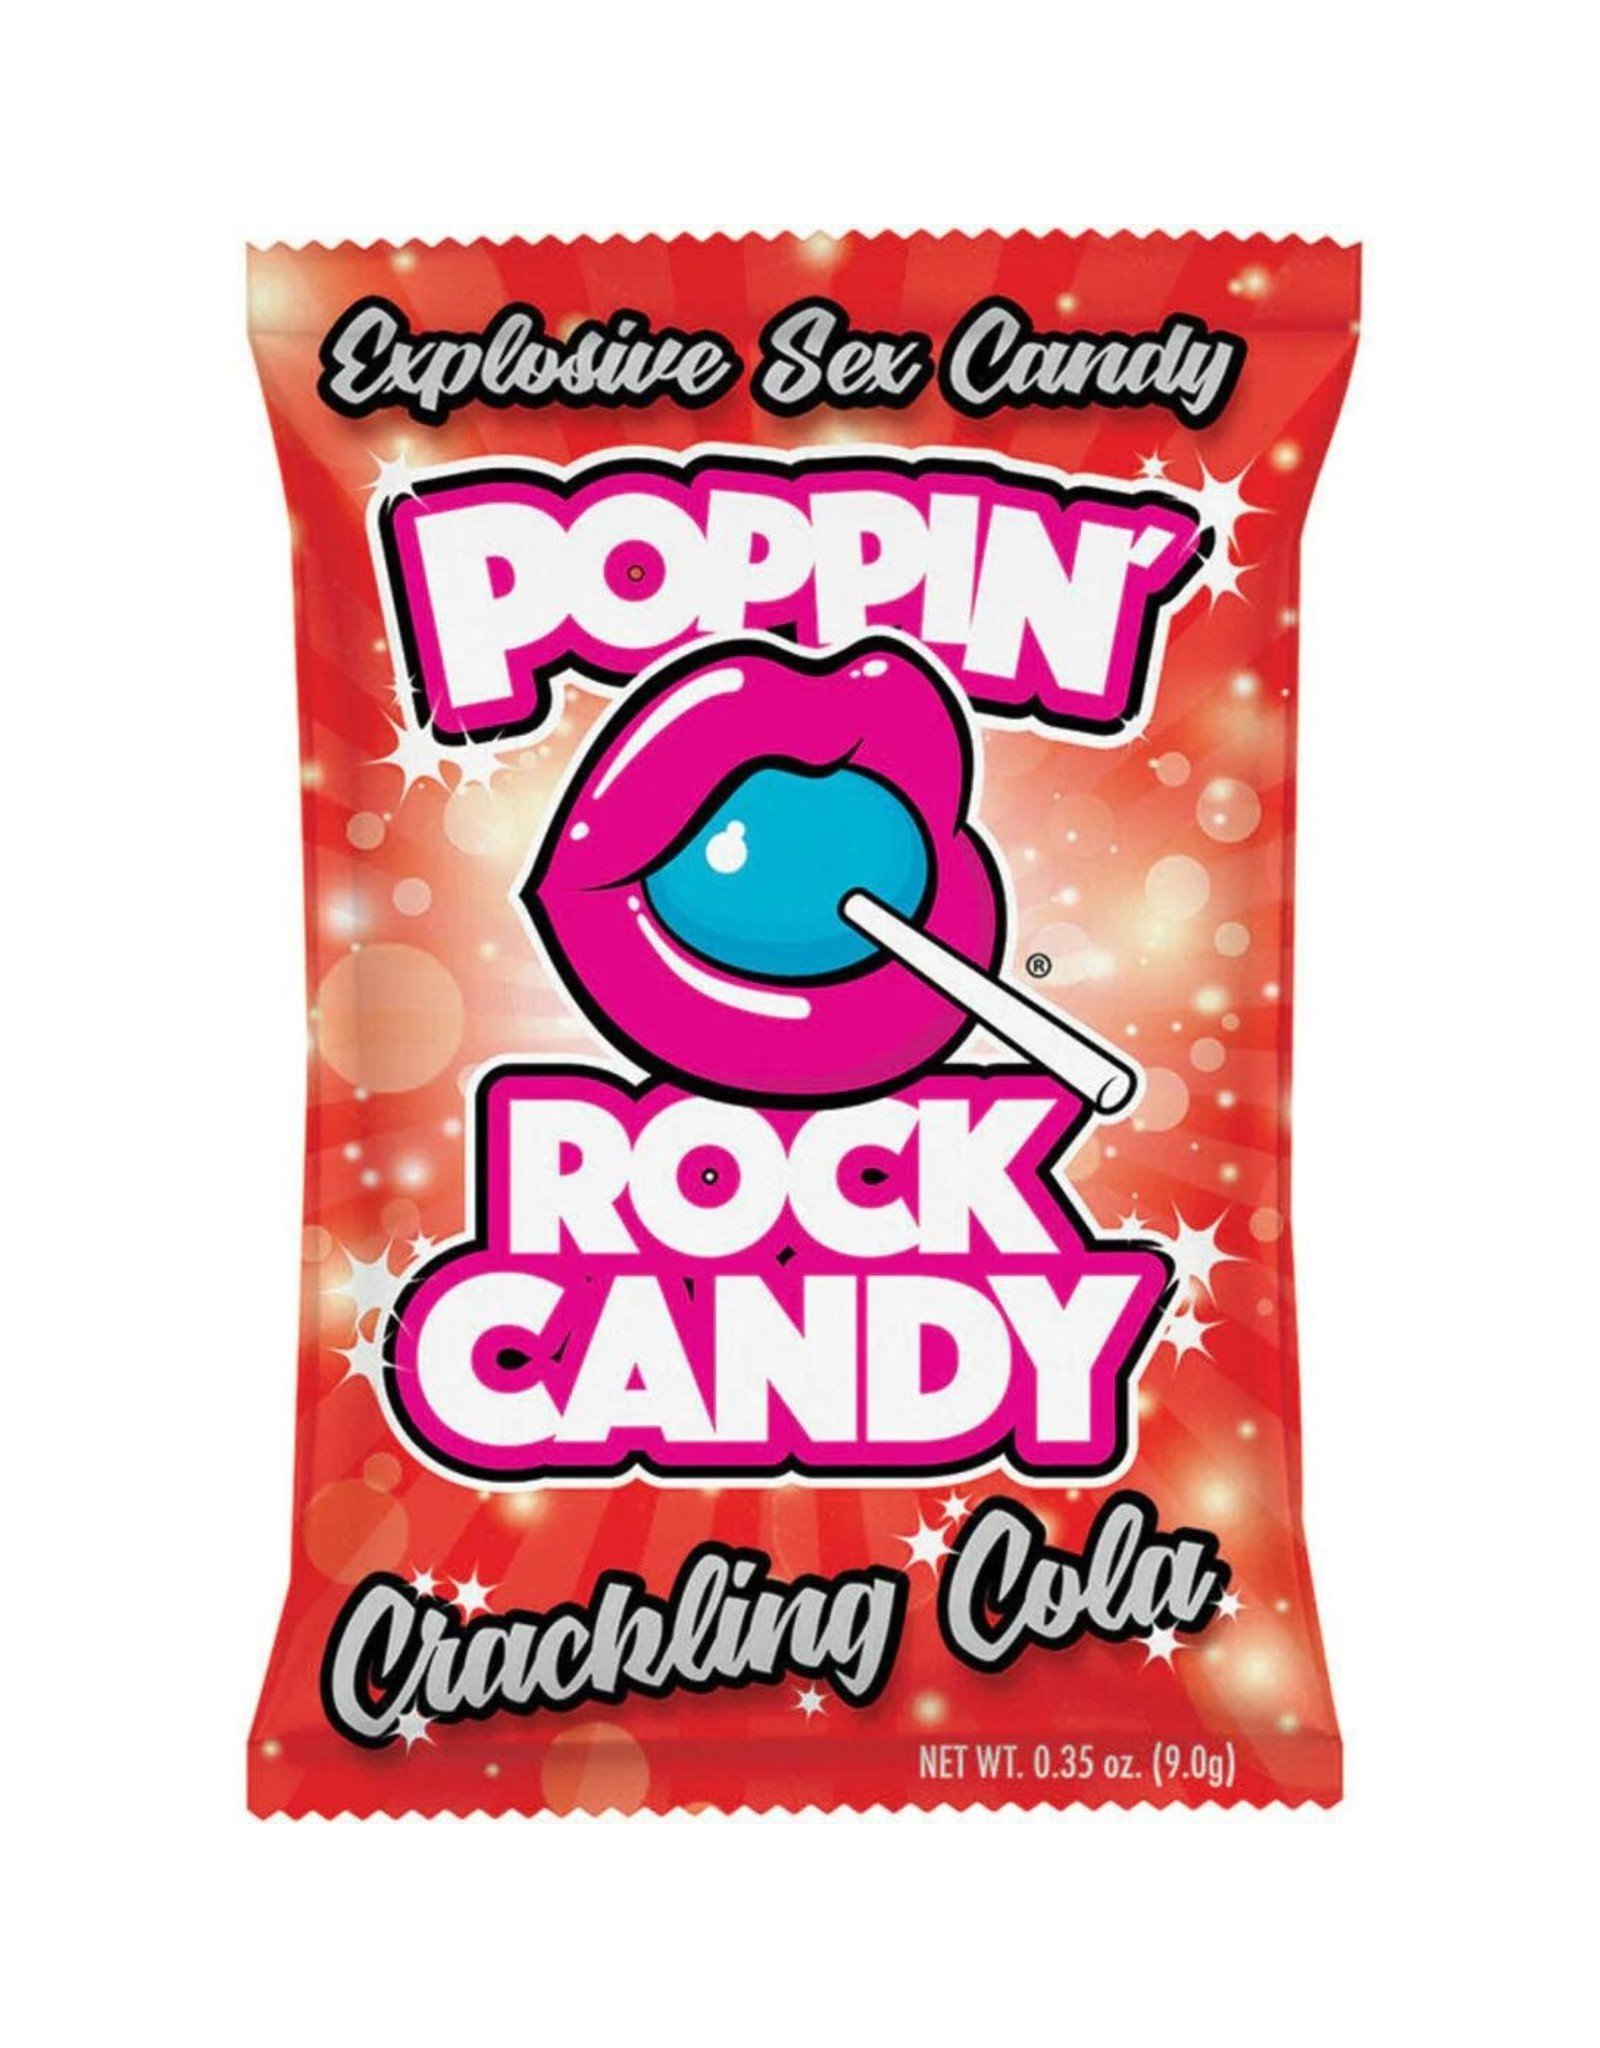 Poppin Rock Candy Crackling Cola